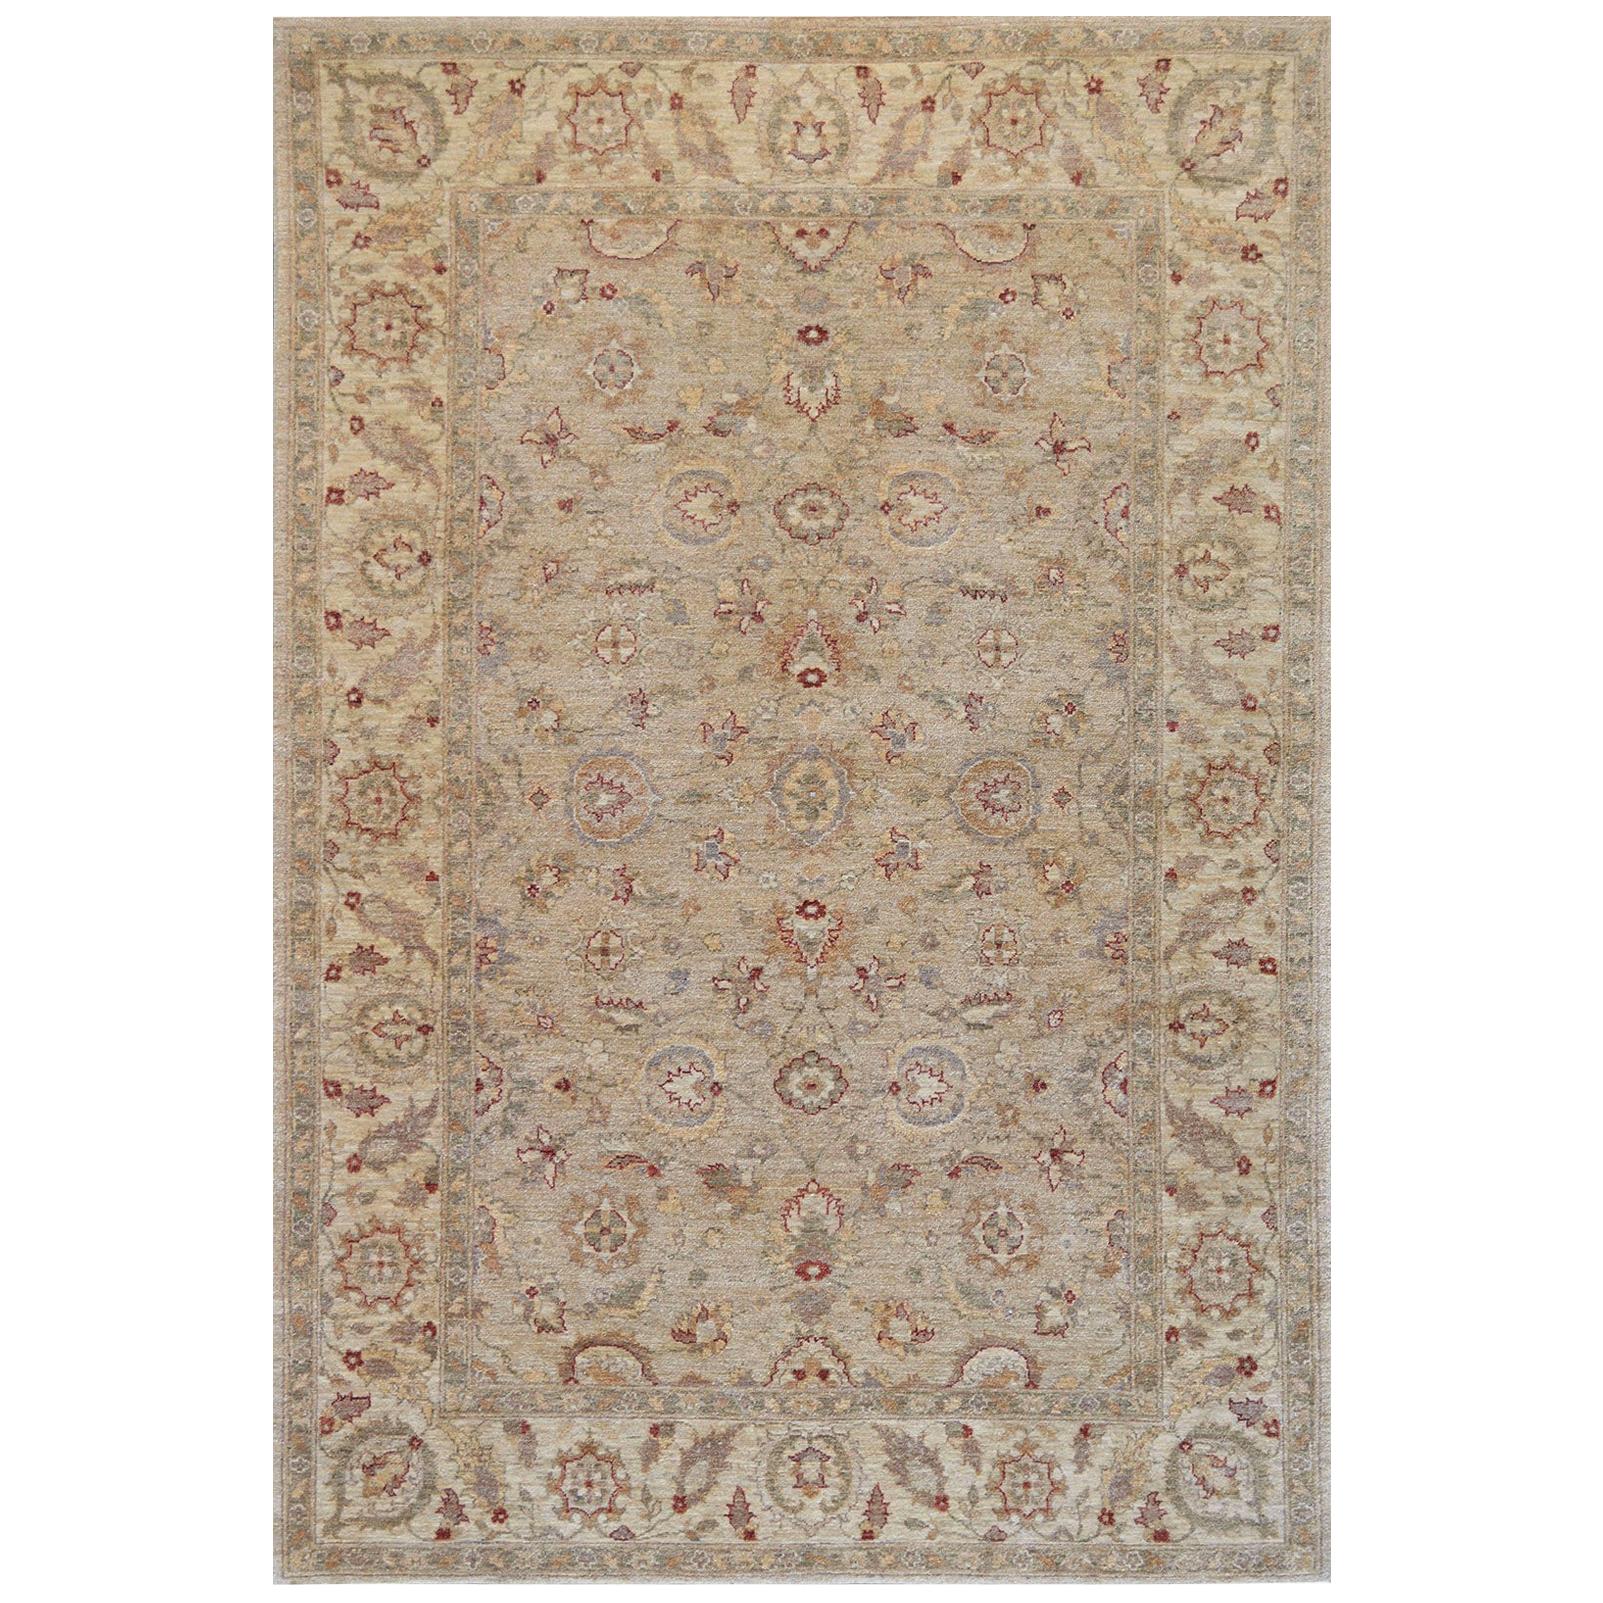 Quality Hand-Woven Agra Inspired Wool Rug For Sale